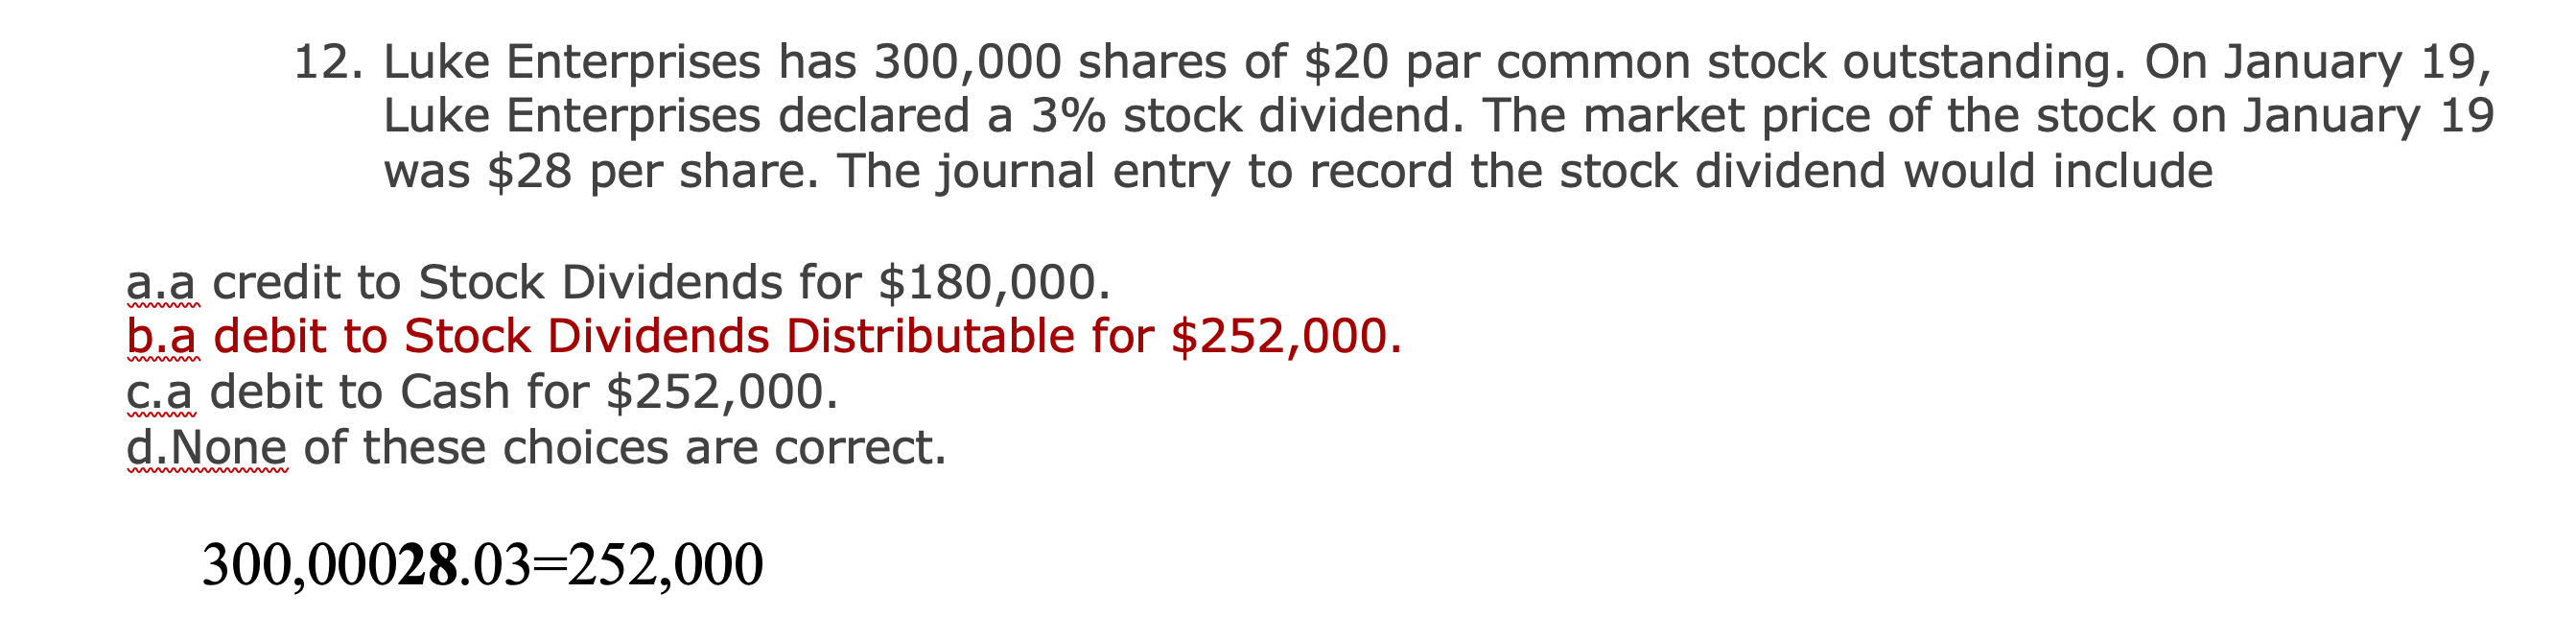 12. Luke Enterprises has 300,000 shares of $20 par common stock outstanding. On January 19,
Luke Enterprises declared a 3% stock dividend. The market price of the stock on January 19
was $28 per share. The journal entry to record the stock dividend would include
a.a credit to Stock Dividends for $180,000.
b.a debit to Stock Dividends Distributable for $252,000.
C.a debit to Cash for $252,000.
d.None of these choices are correct.
wwwwm
